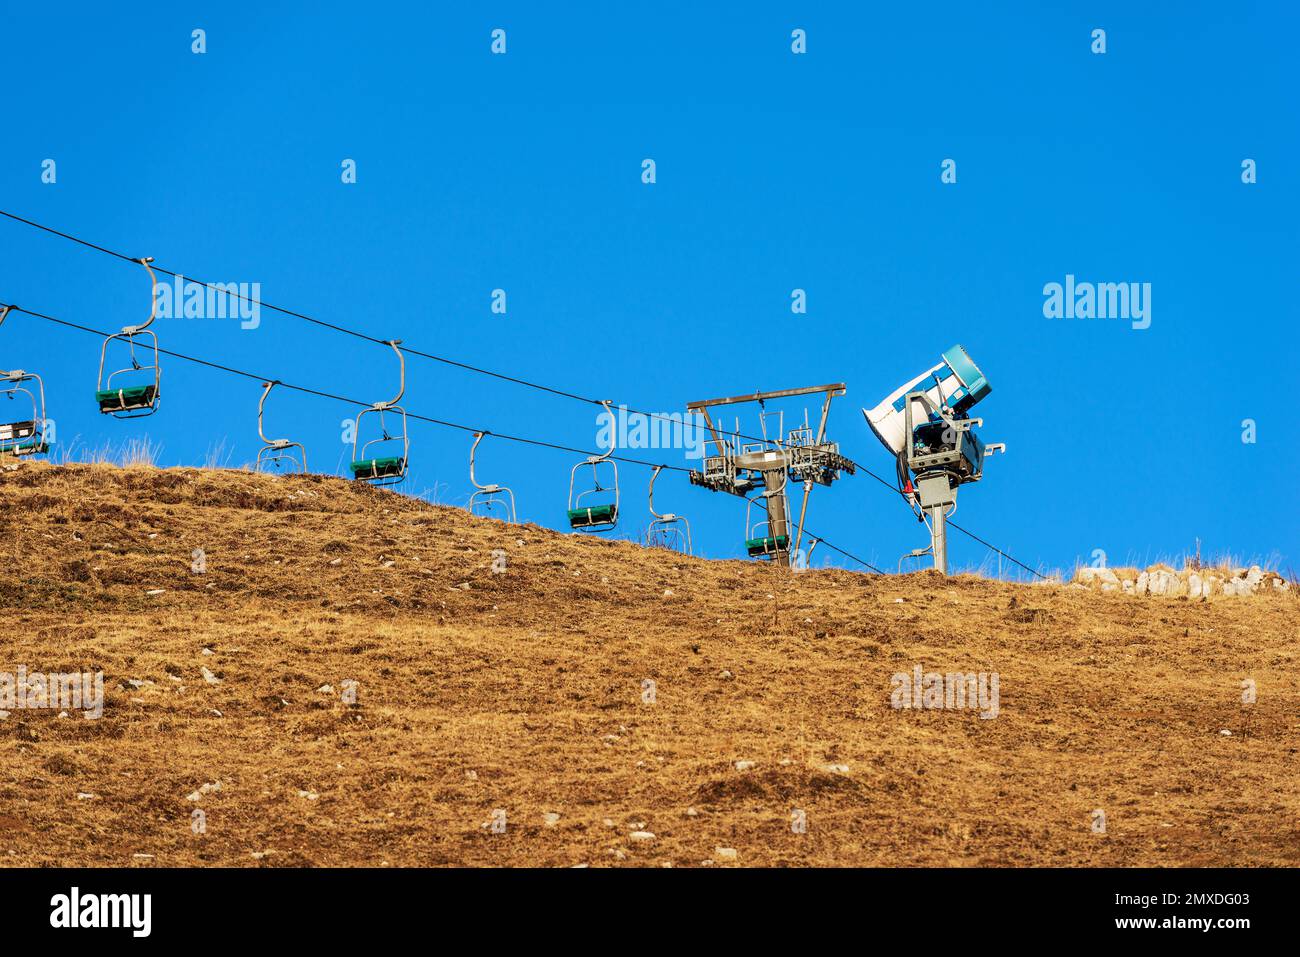 Snow cannon or snowmaking system and an empty chairlift in winter on a brown meadow, ski slope, without snow due to the too hot. Veneto, Italy. Stock Photo